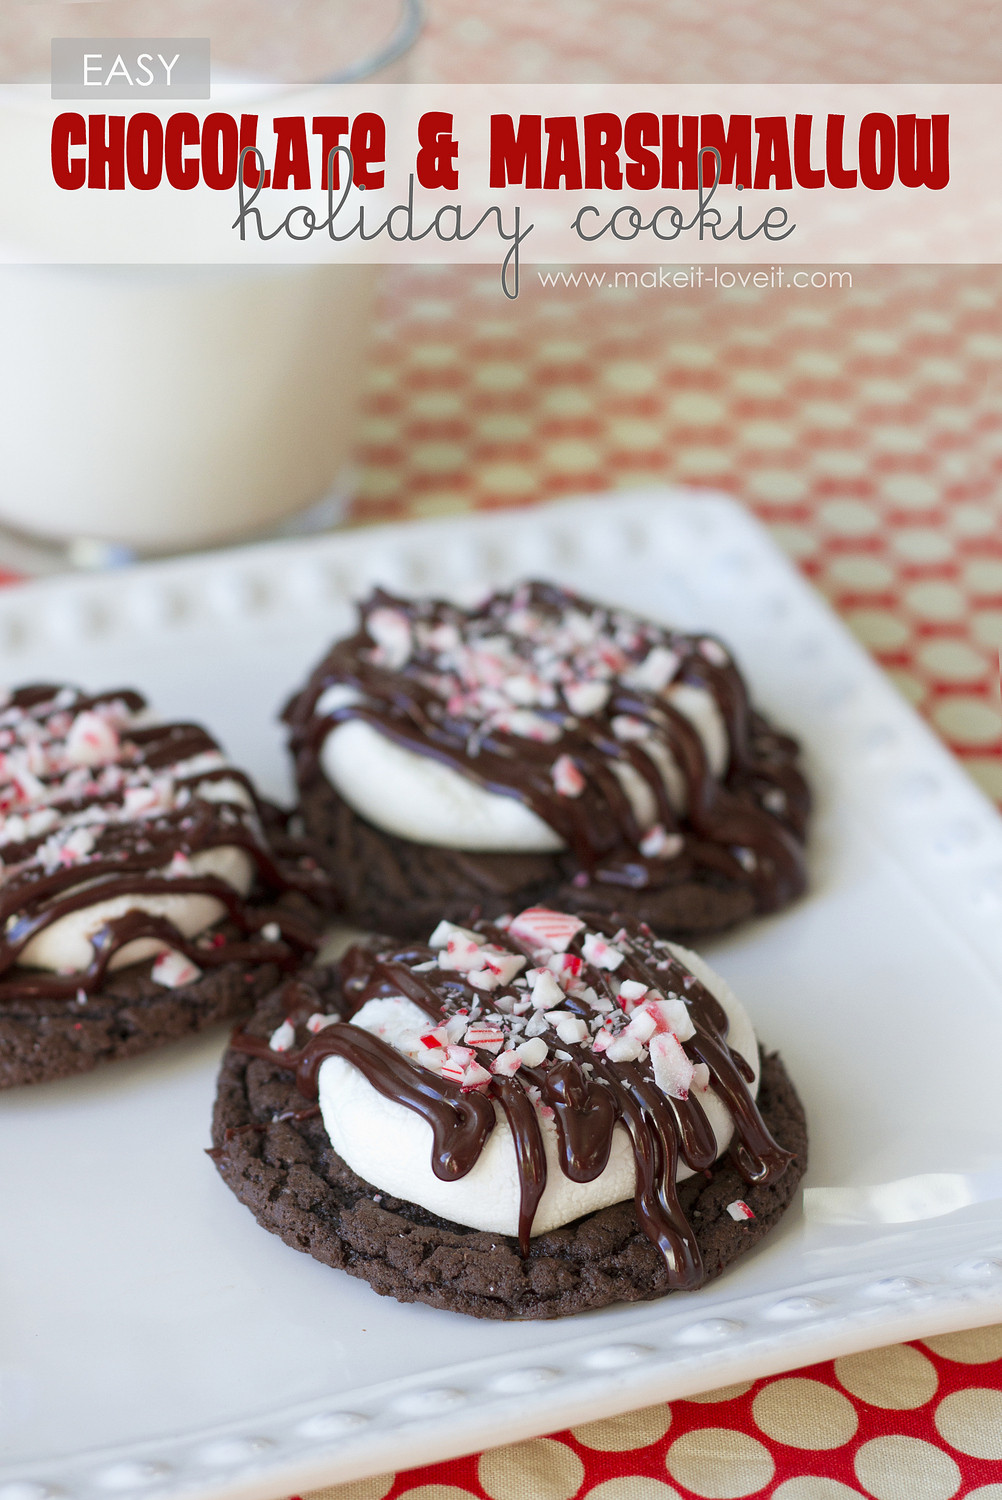 Quick Christmas Cookies
 EASY Chocolate & Marshmallow Holiday Cookie plus a